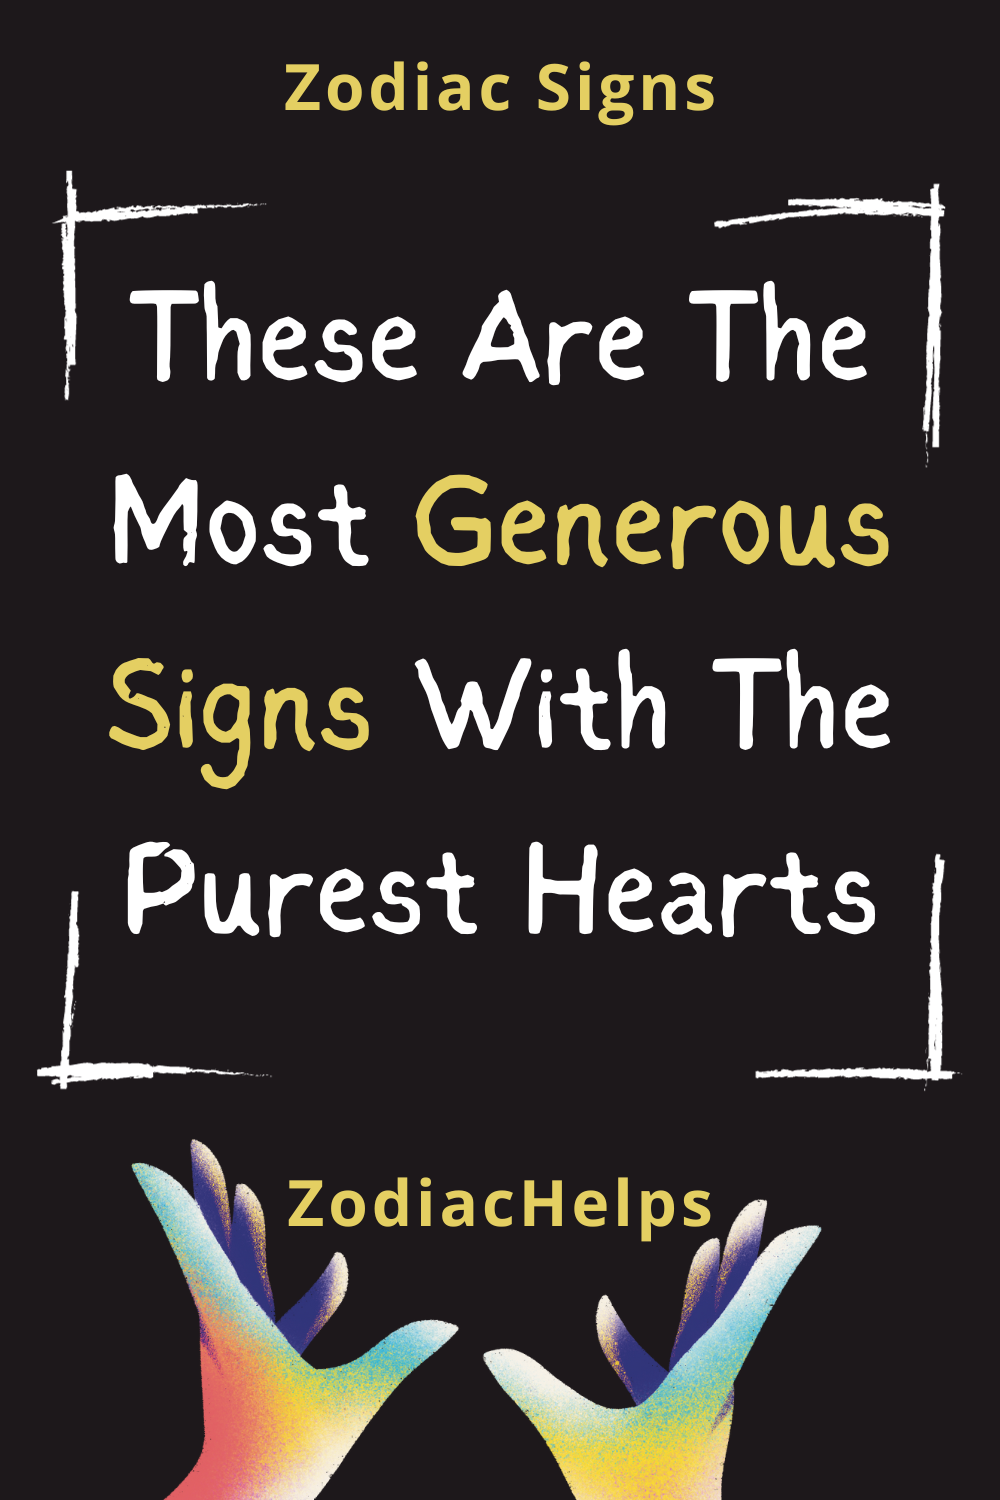 These Are The Most Generous Signs With The Purest Hearts